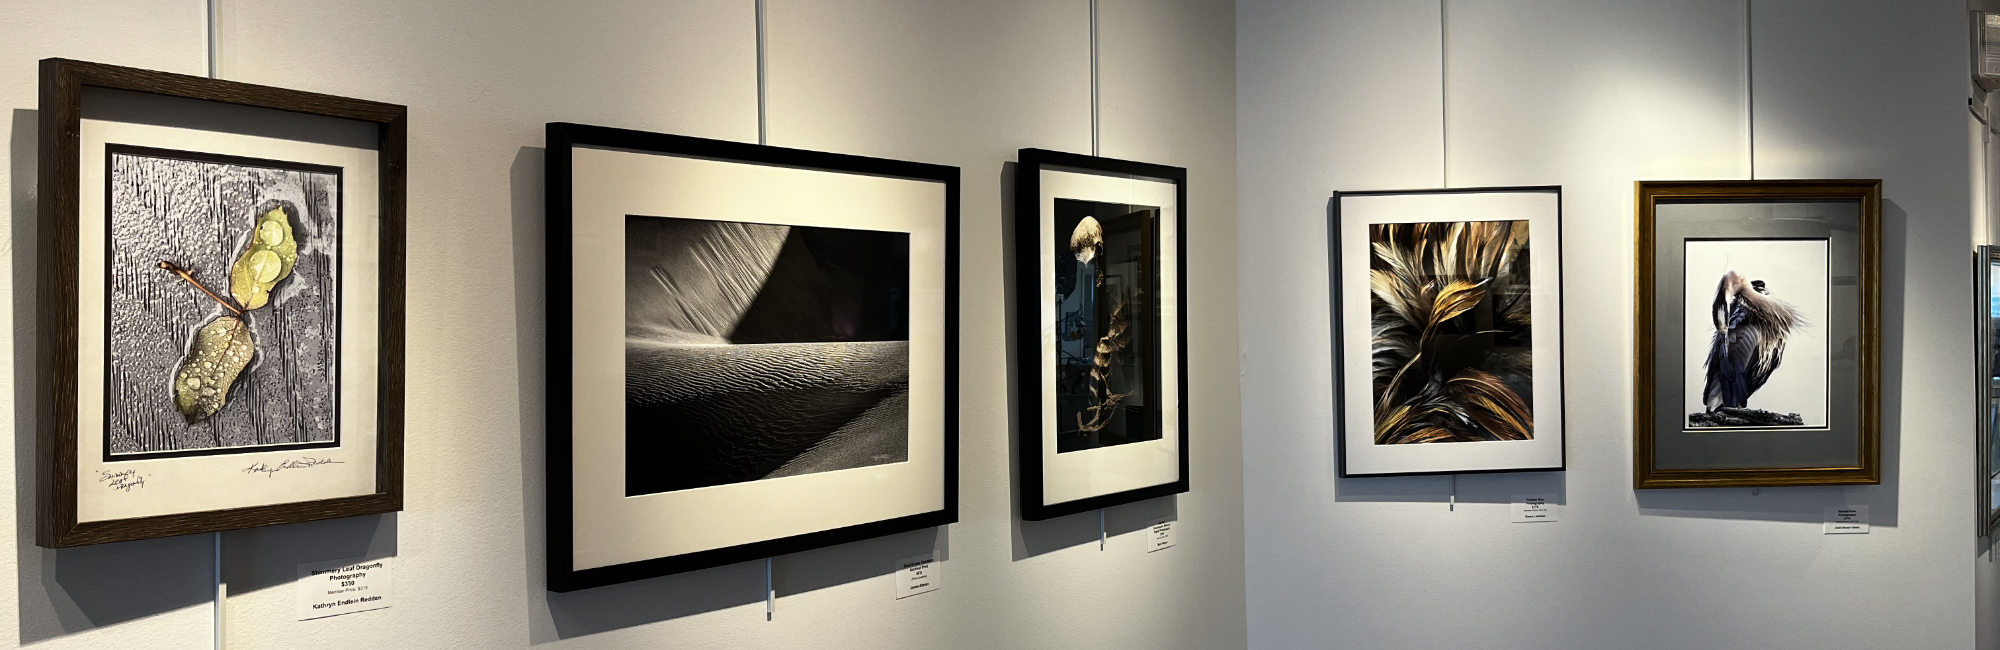 Featured in the Sisson Galleria / "Texture", Juried Photography Show